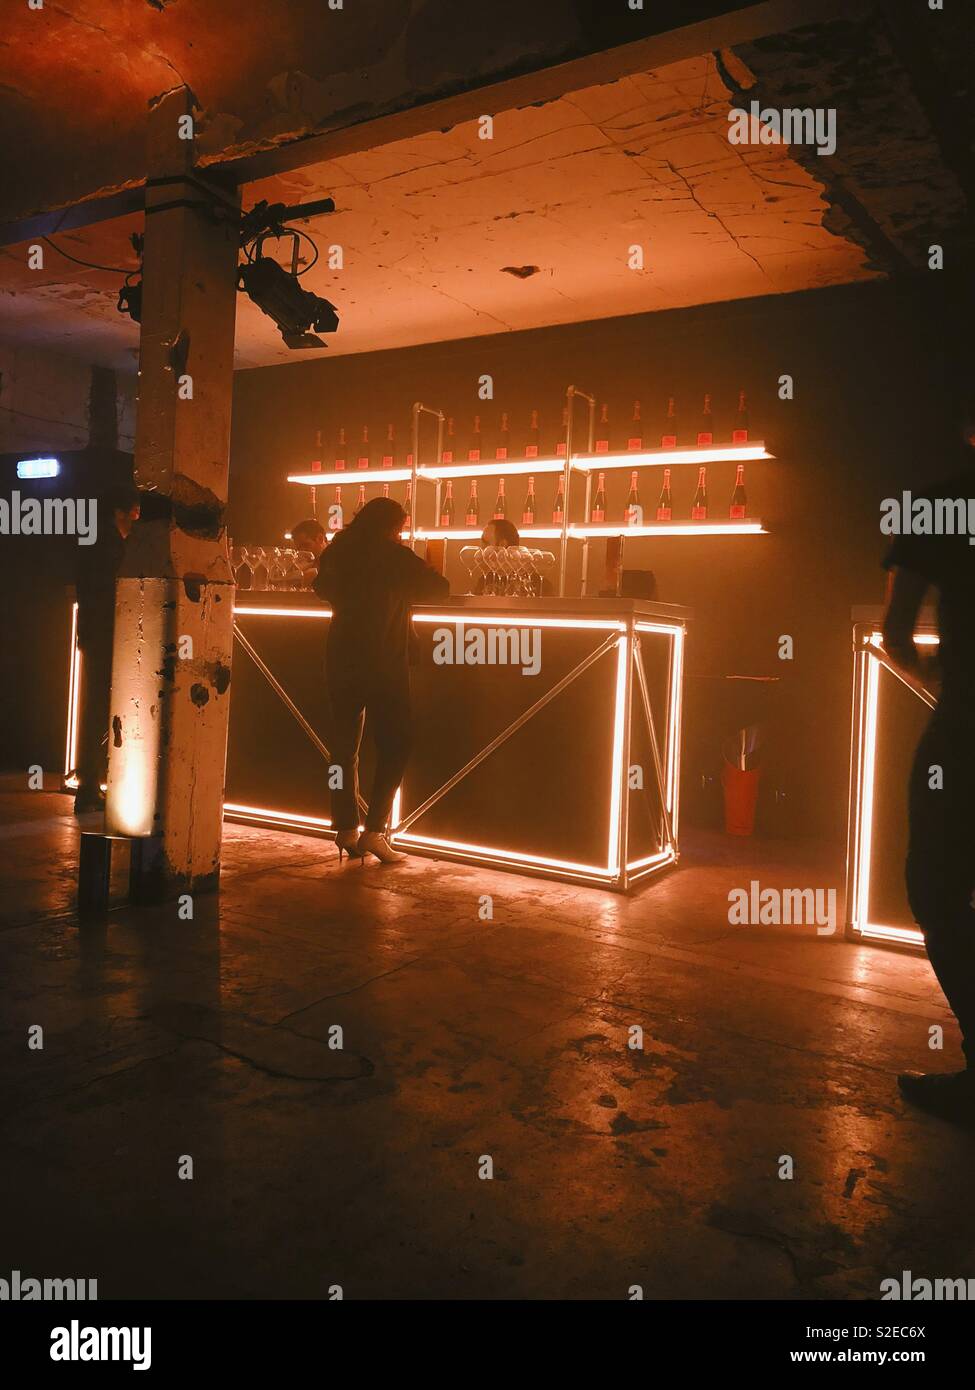 Woman ordering a drink at Champagne bar in warehouse with dramatic lighting and lines of veuve cliquot champagne on the illuminated shelving Stock Photo